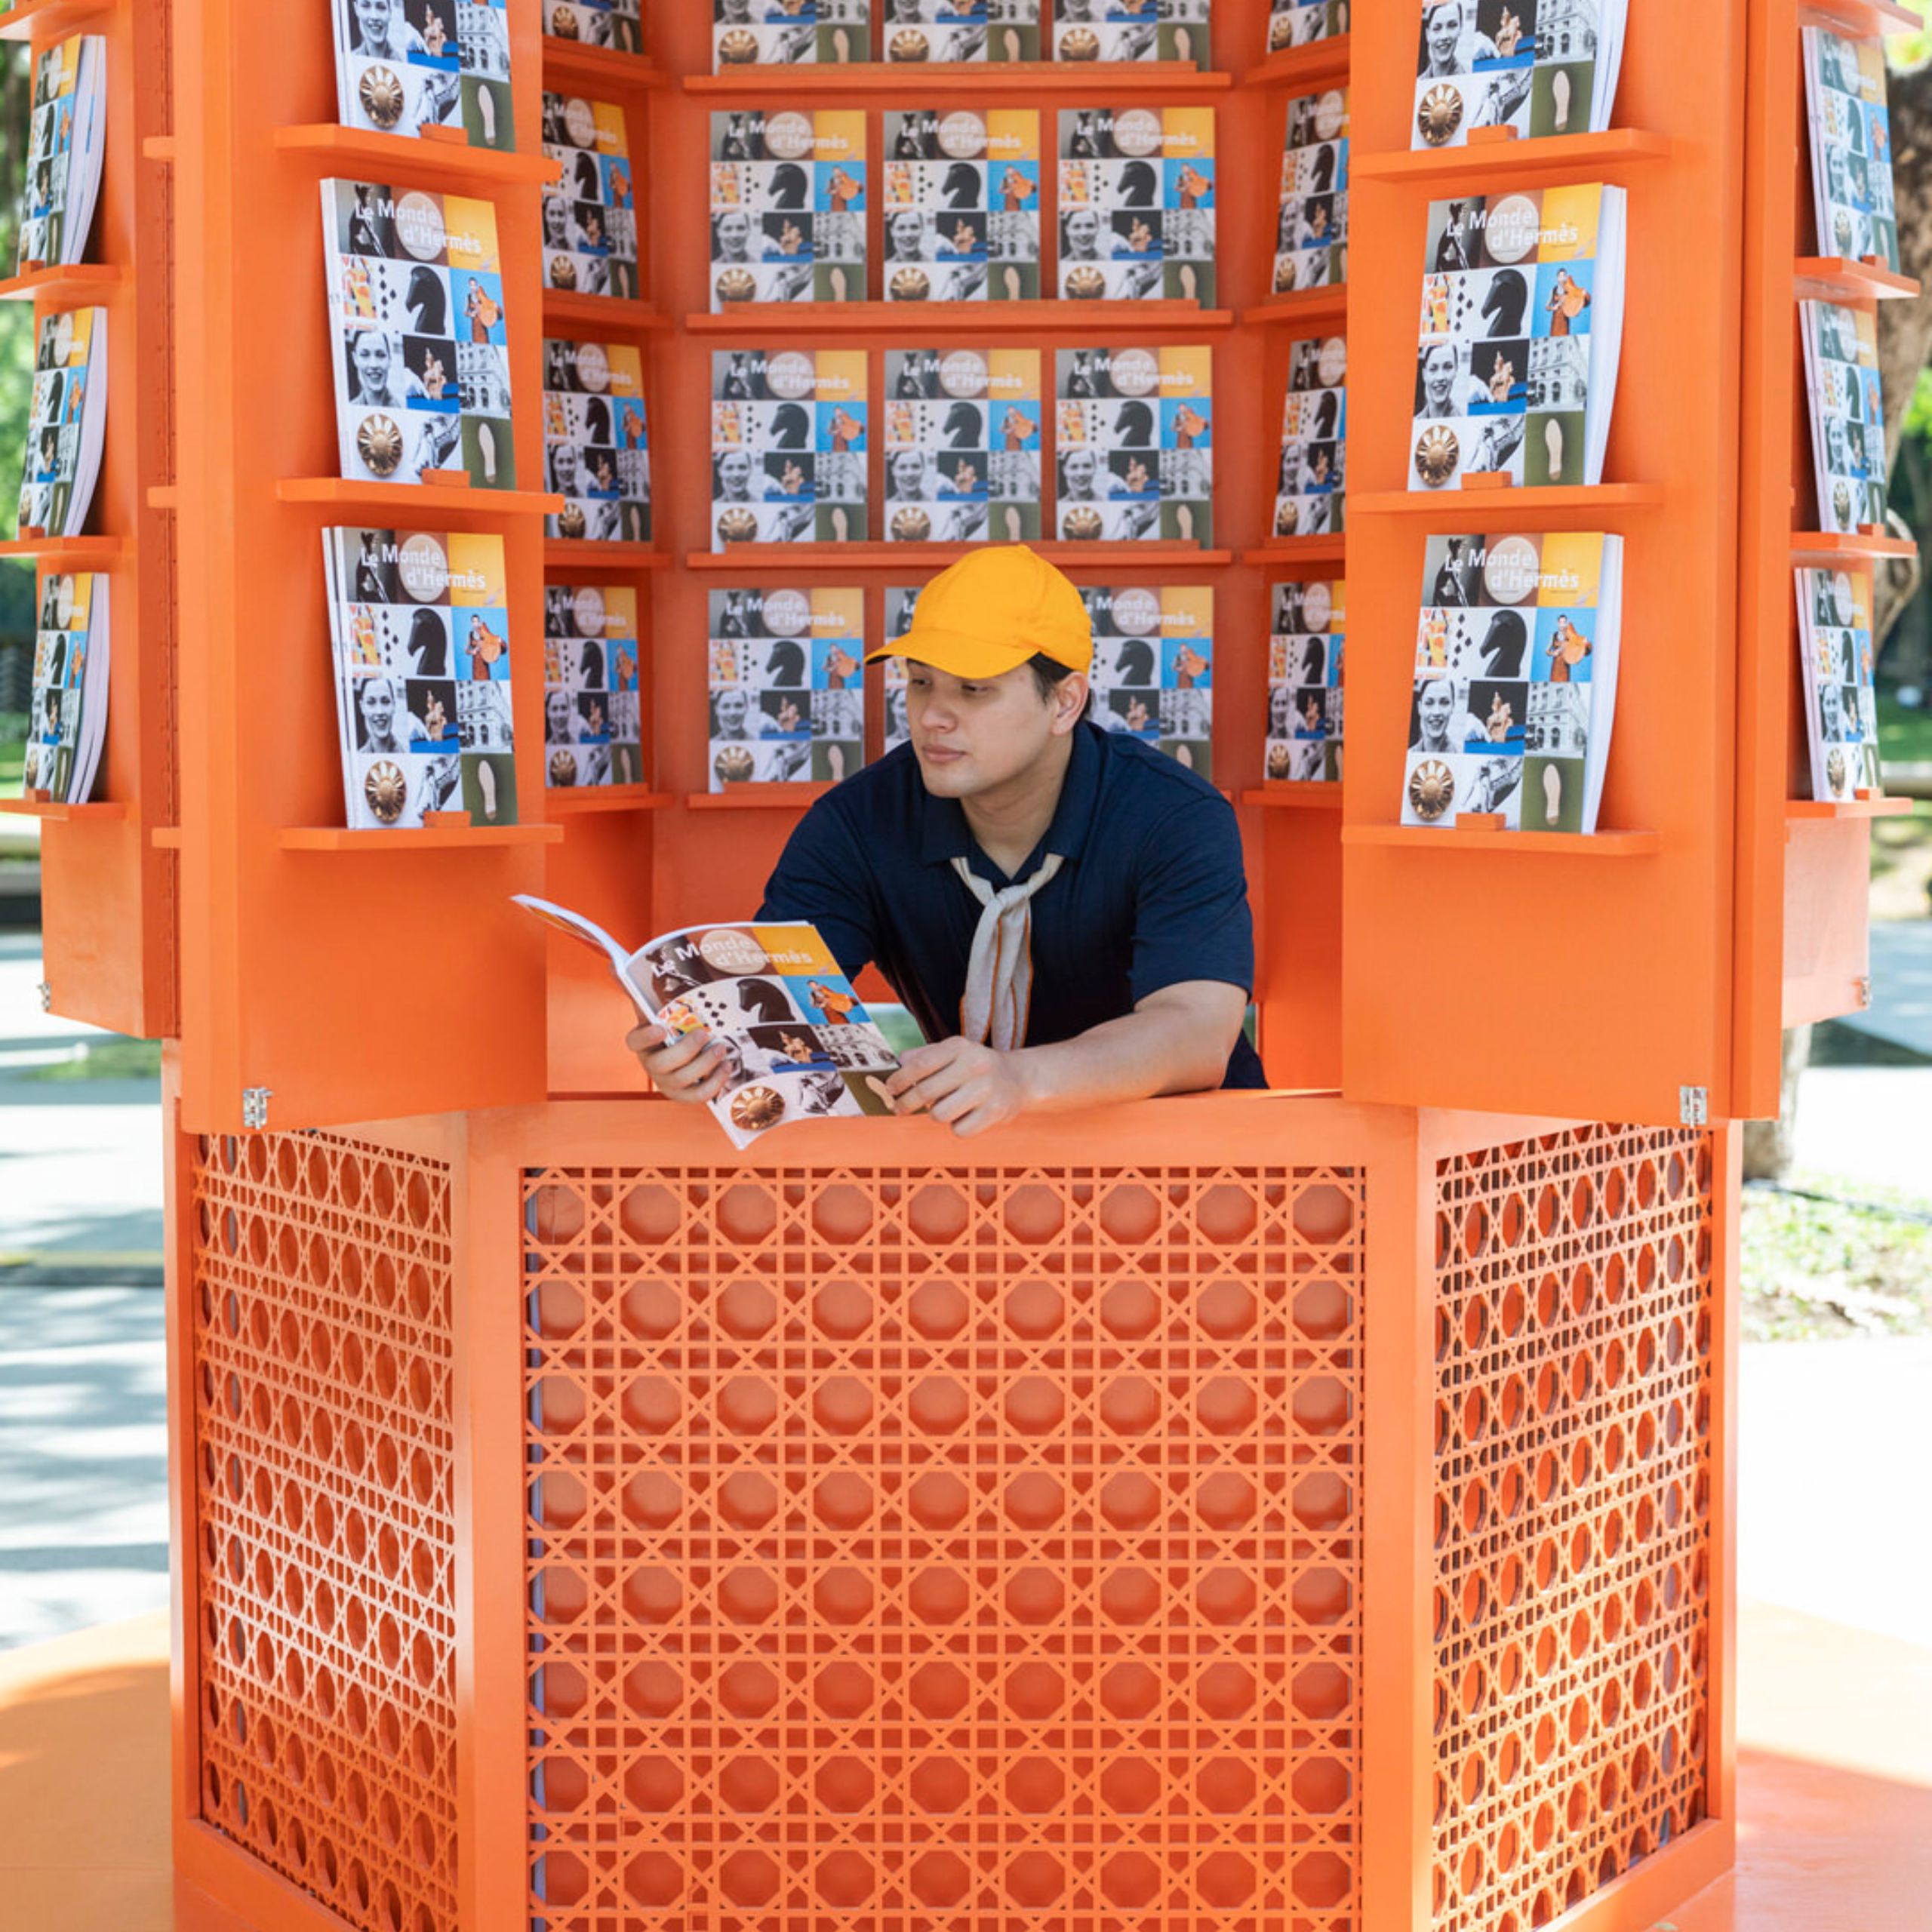 The Le Monde d'Hermès Magazine Kiosk Has Officially Landed in Makati